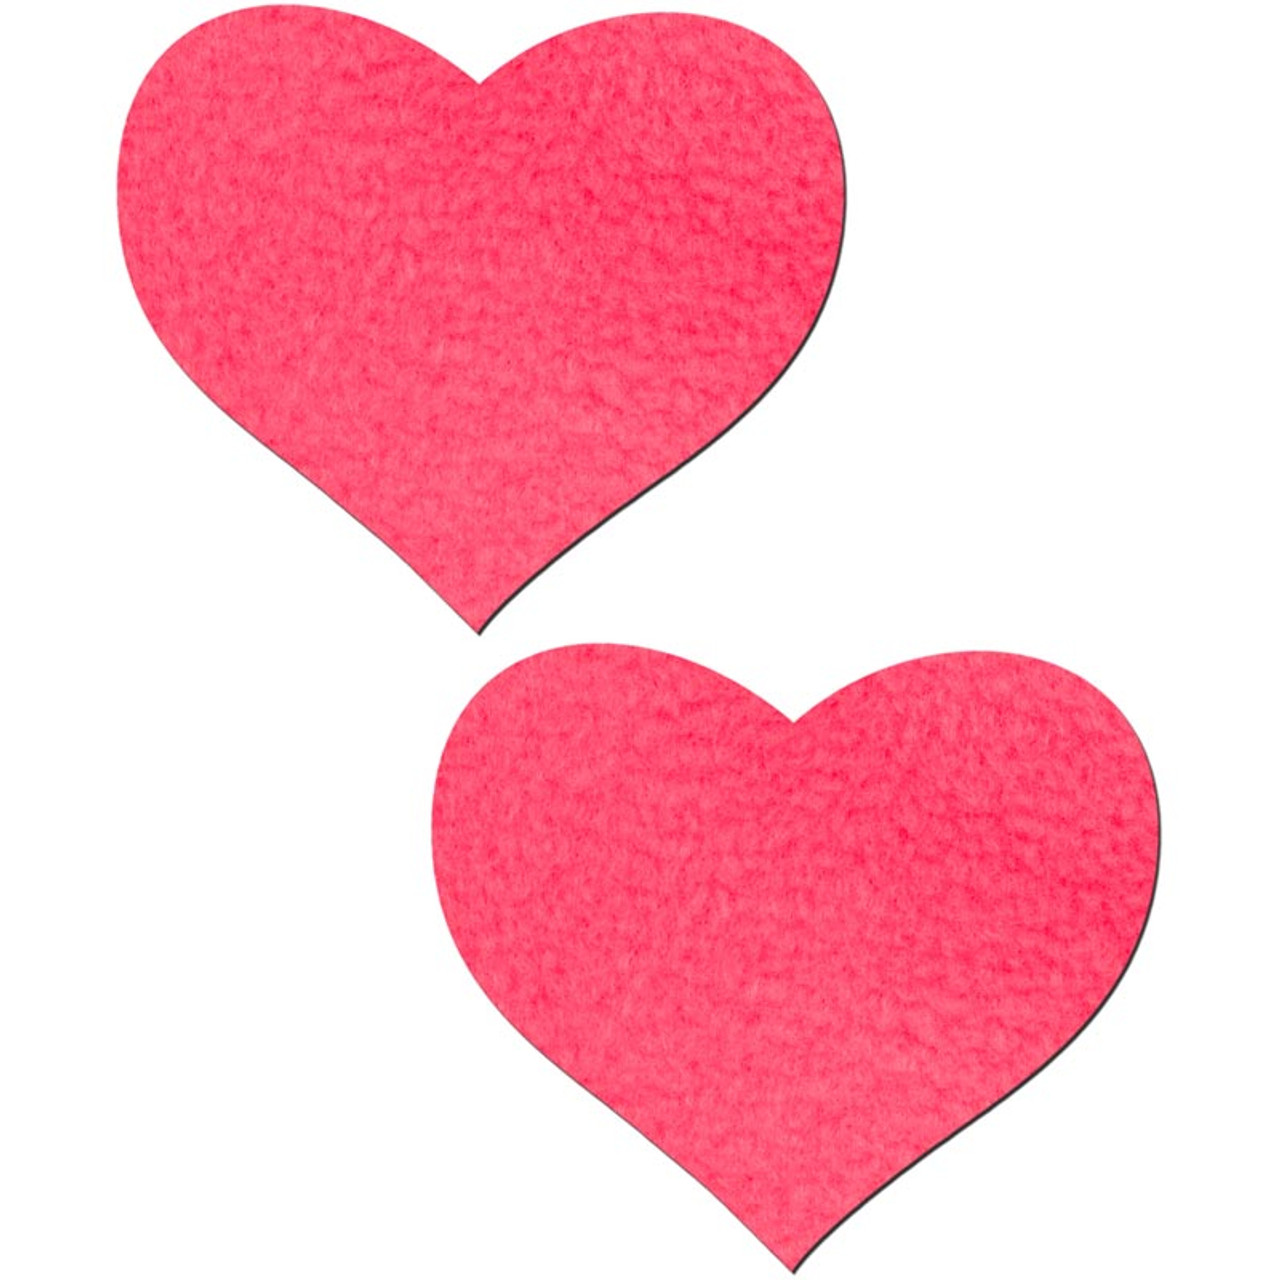 Pastease Neon Pink Day Glow Heart Shaped Pasties Dallas Novelty